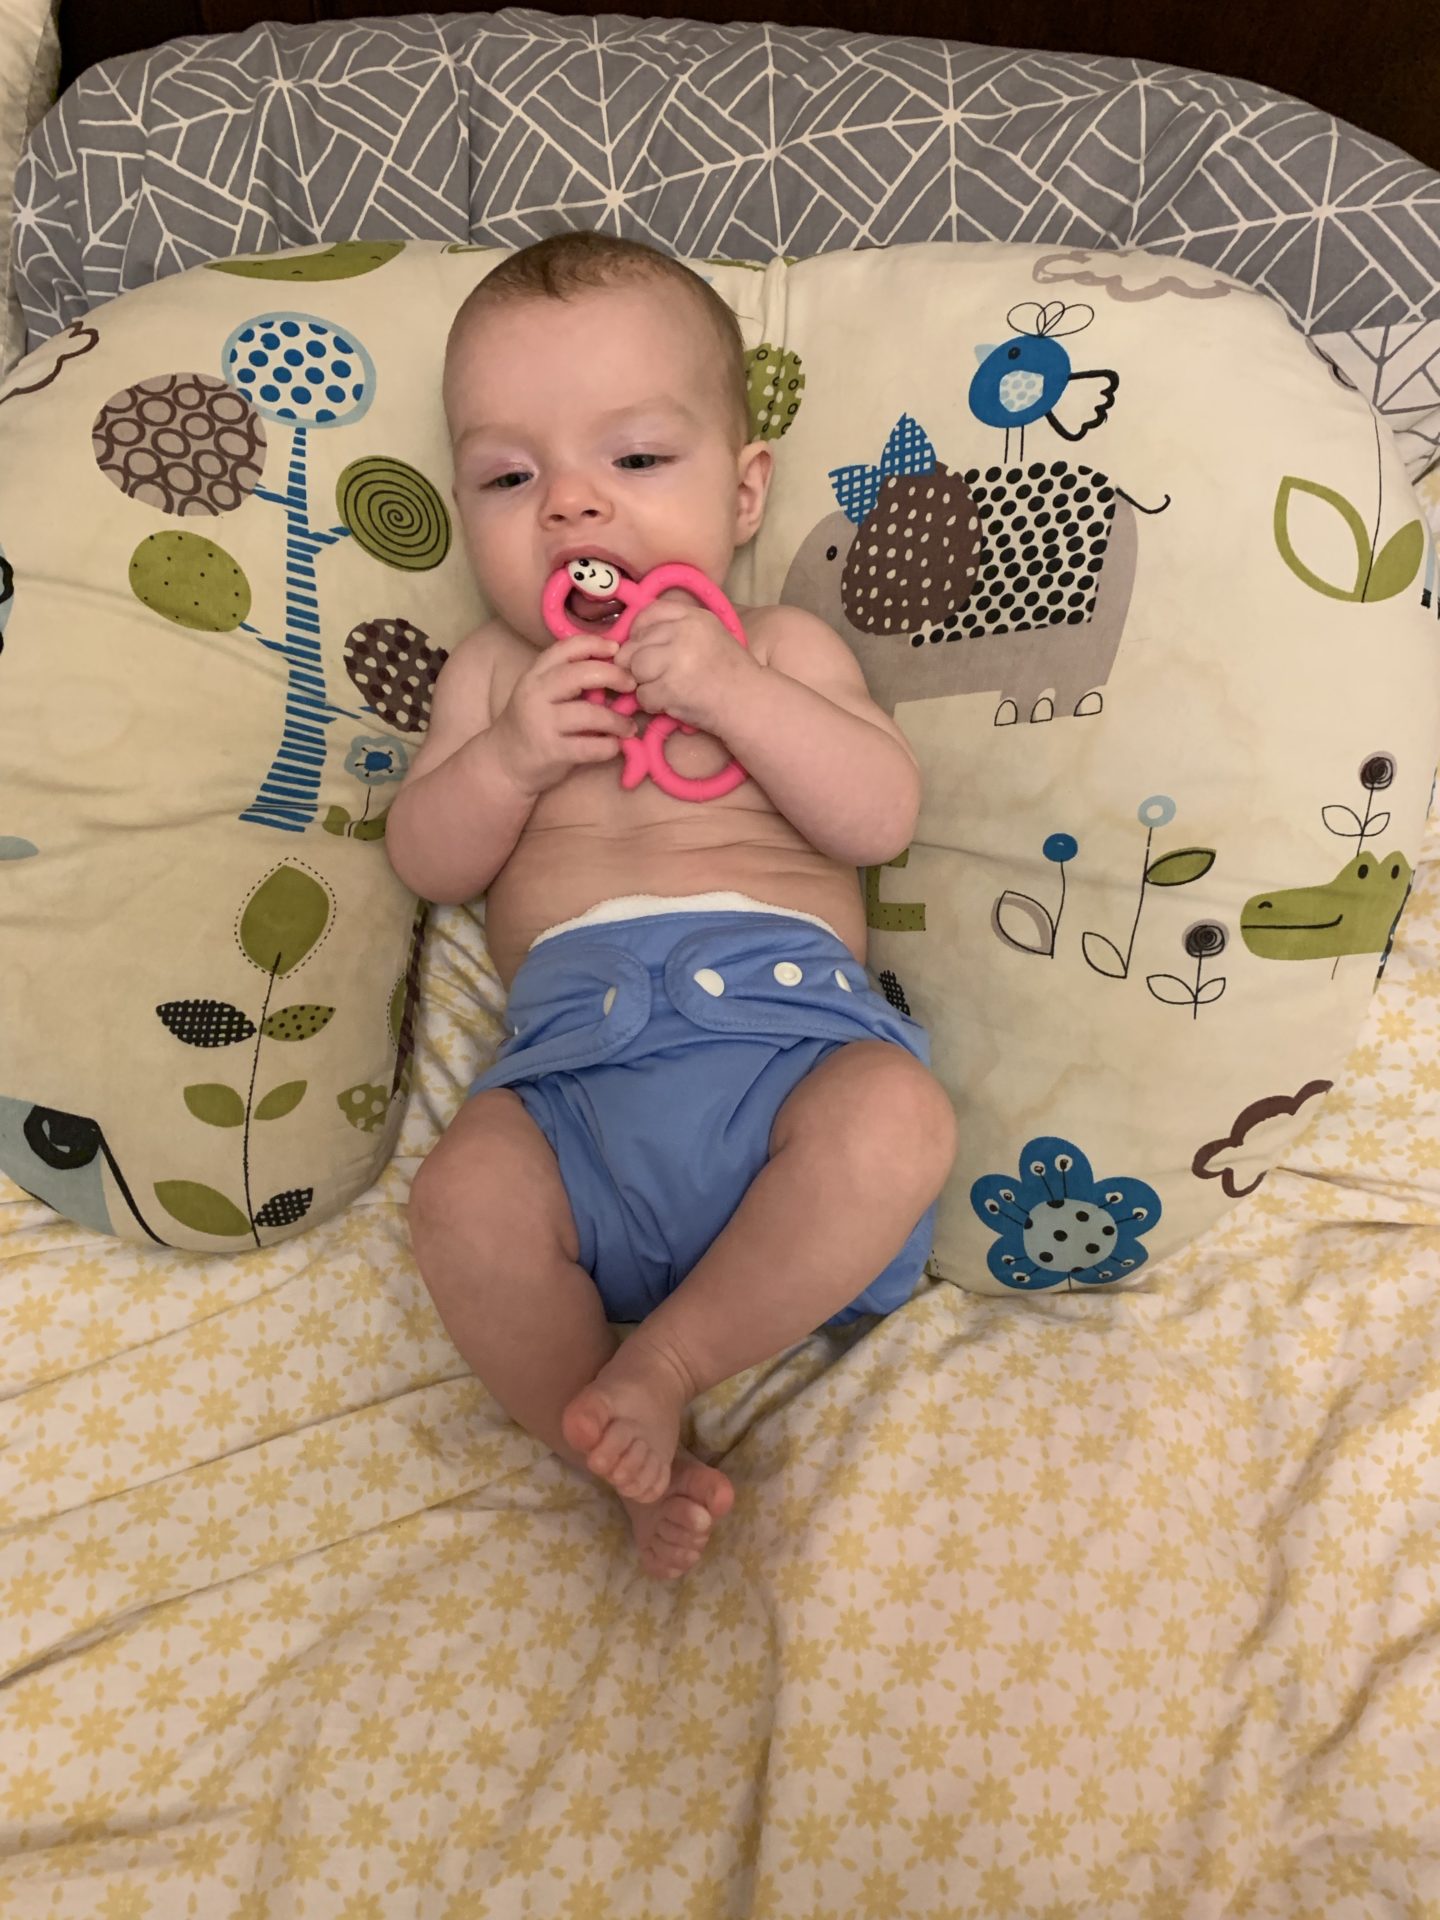 A beginners guide to using reusable nappies – everything you need to know about switching to cloth nappies